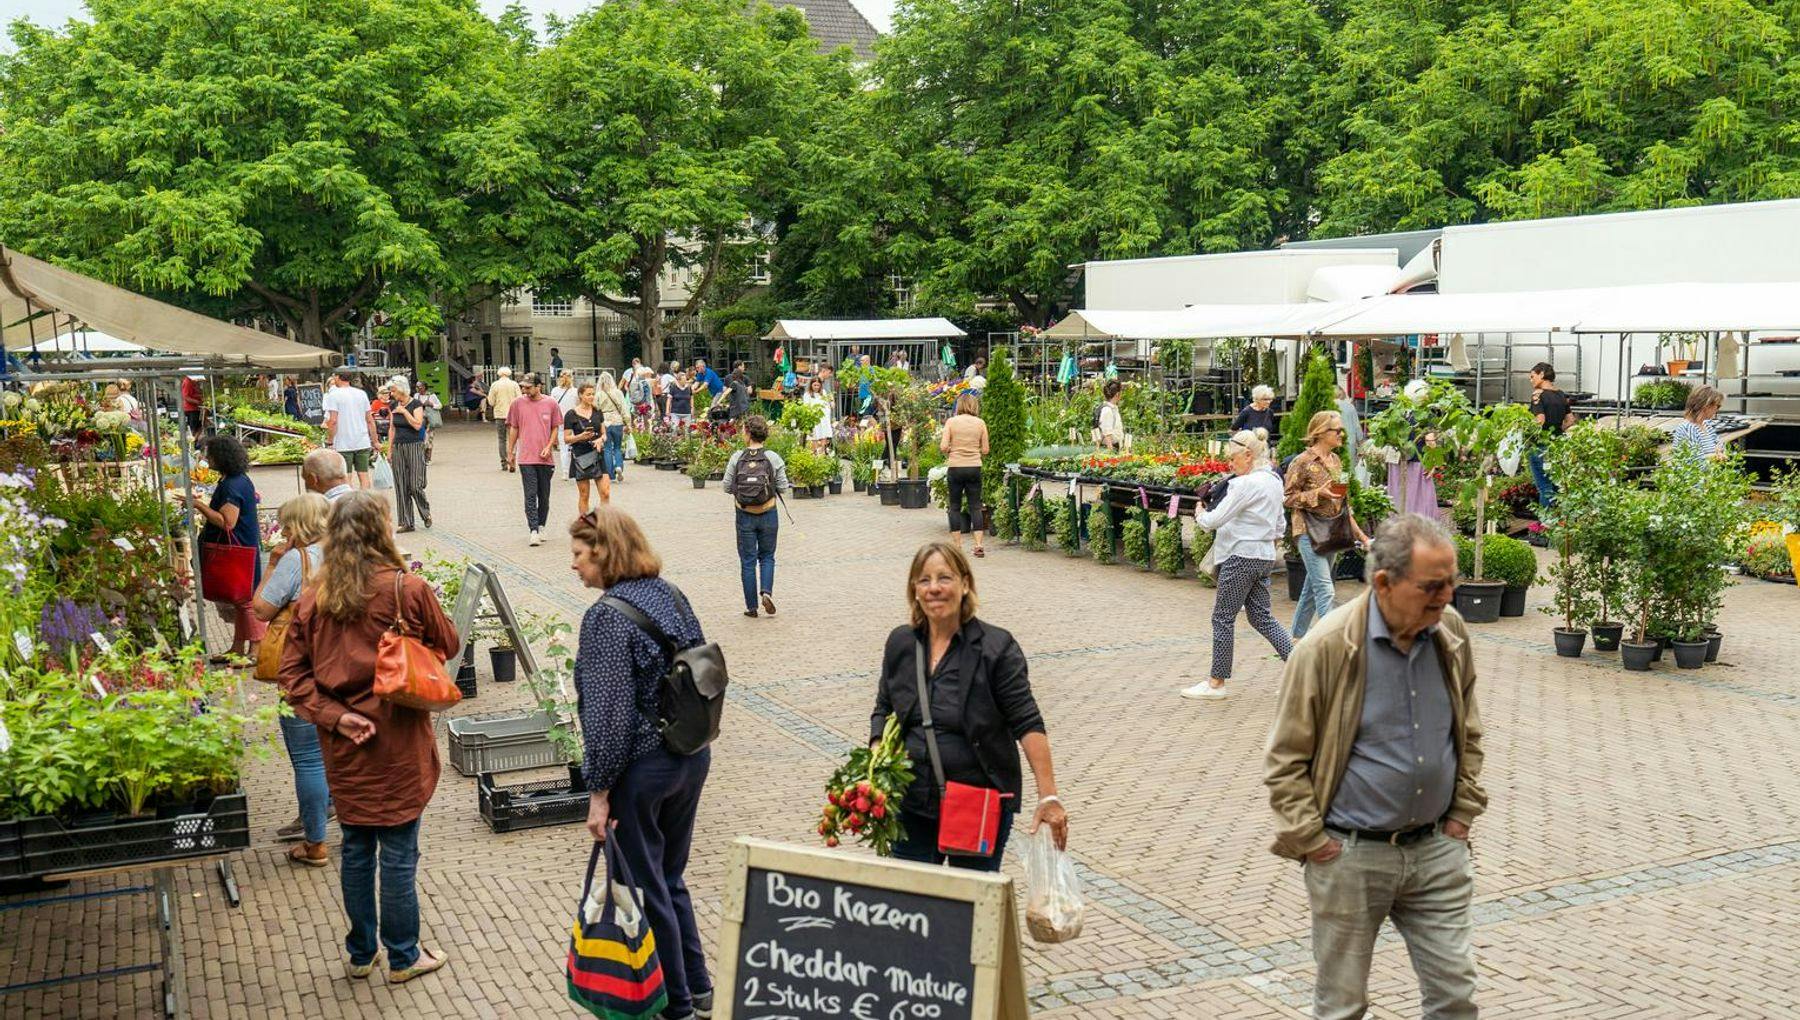 People shopping at the Amstelveld market